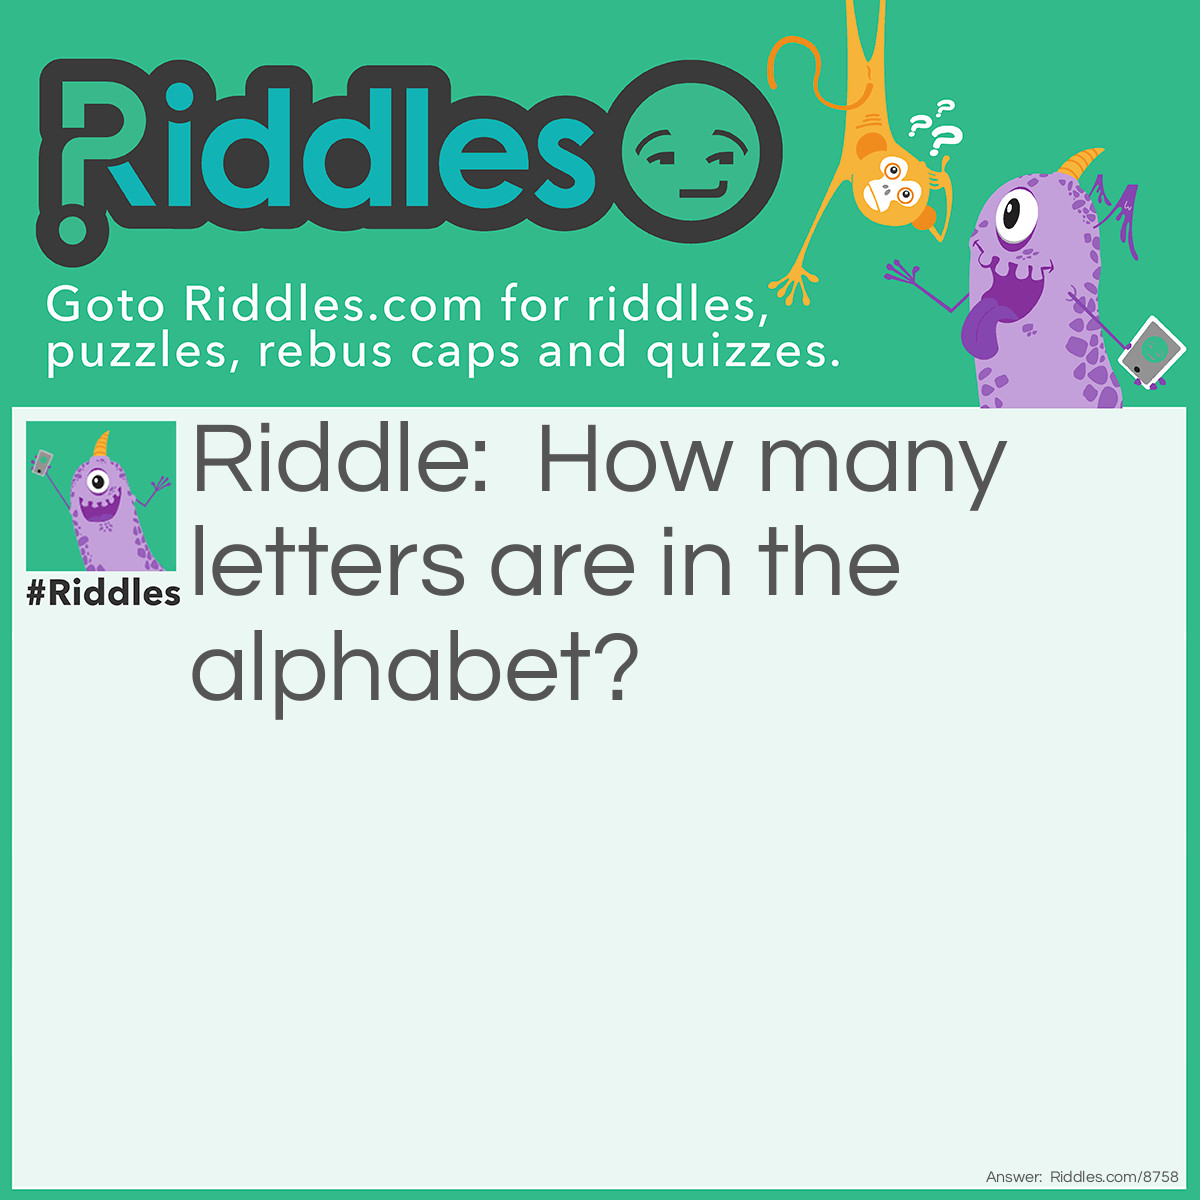 Riddle: How many letters are in the alphabet? Answer: There are 11 letters in the words “the alphabet”